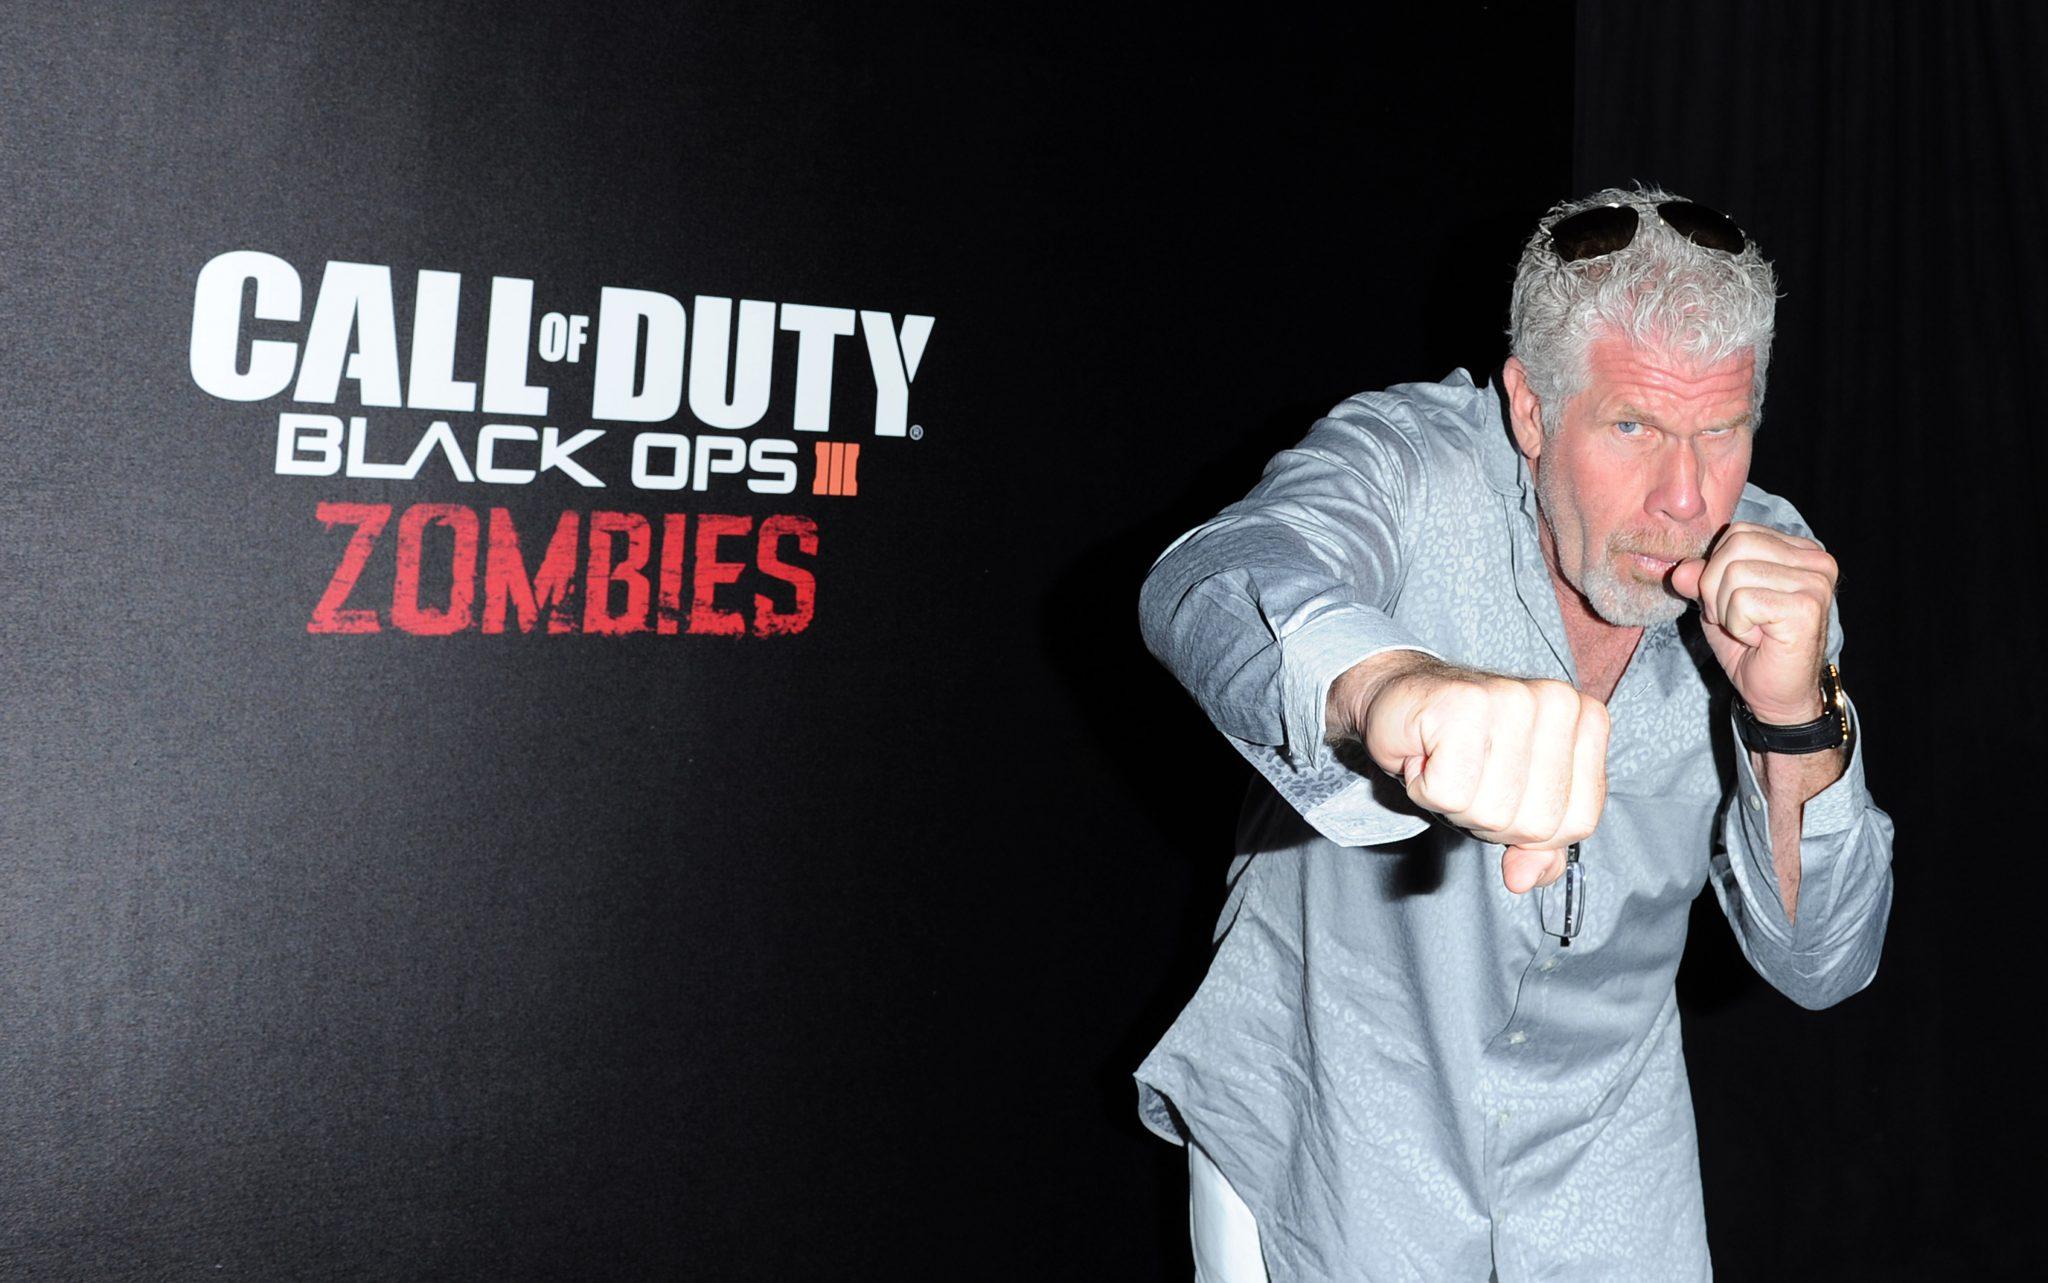 Ron Perlman on Zombies and the Evolution of Gaming